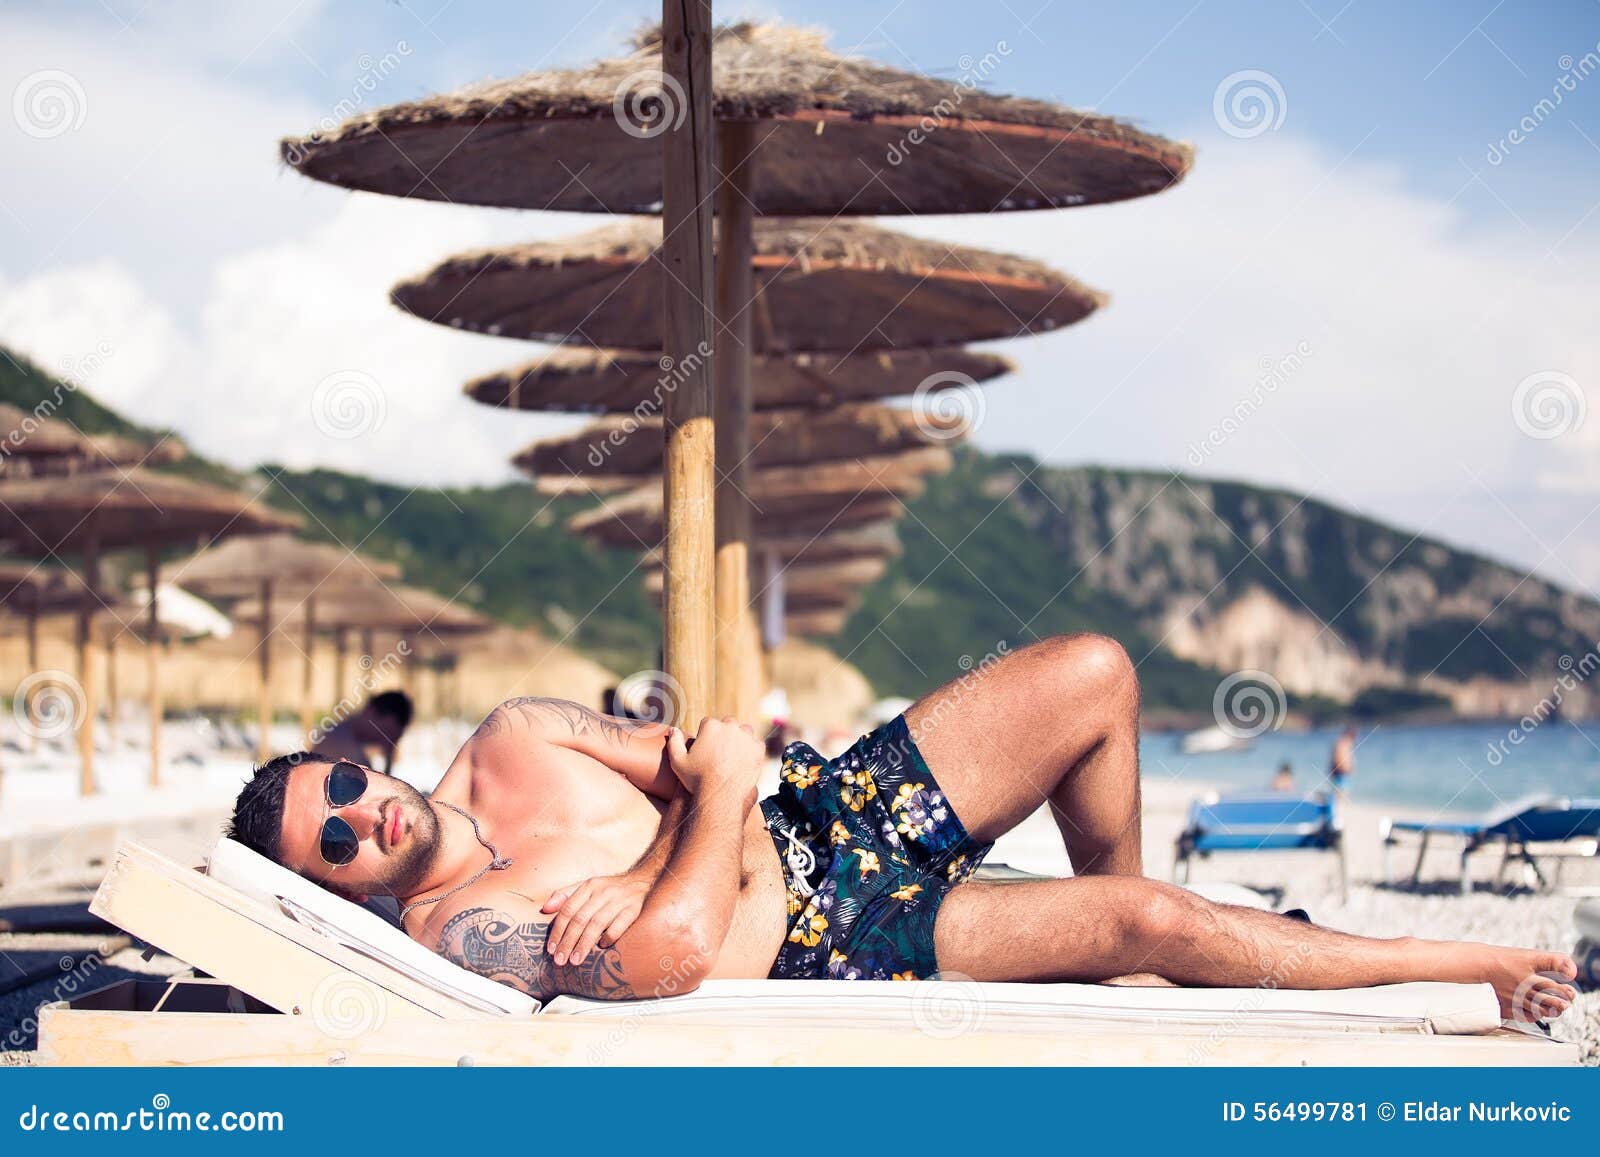 Handsome Attractive Muscular Man Lying on Sunbed and  Man  with Tattoo Sunbathing, Spf Protection and Leisure Stock Image - Image of  relaxation, leisure: 56499781